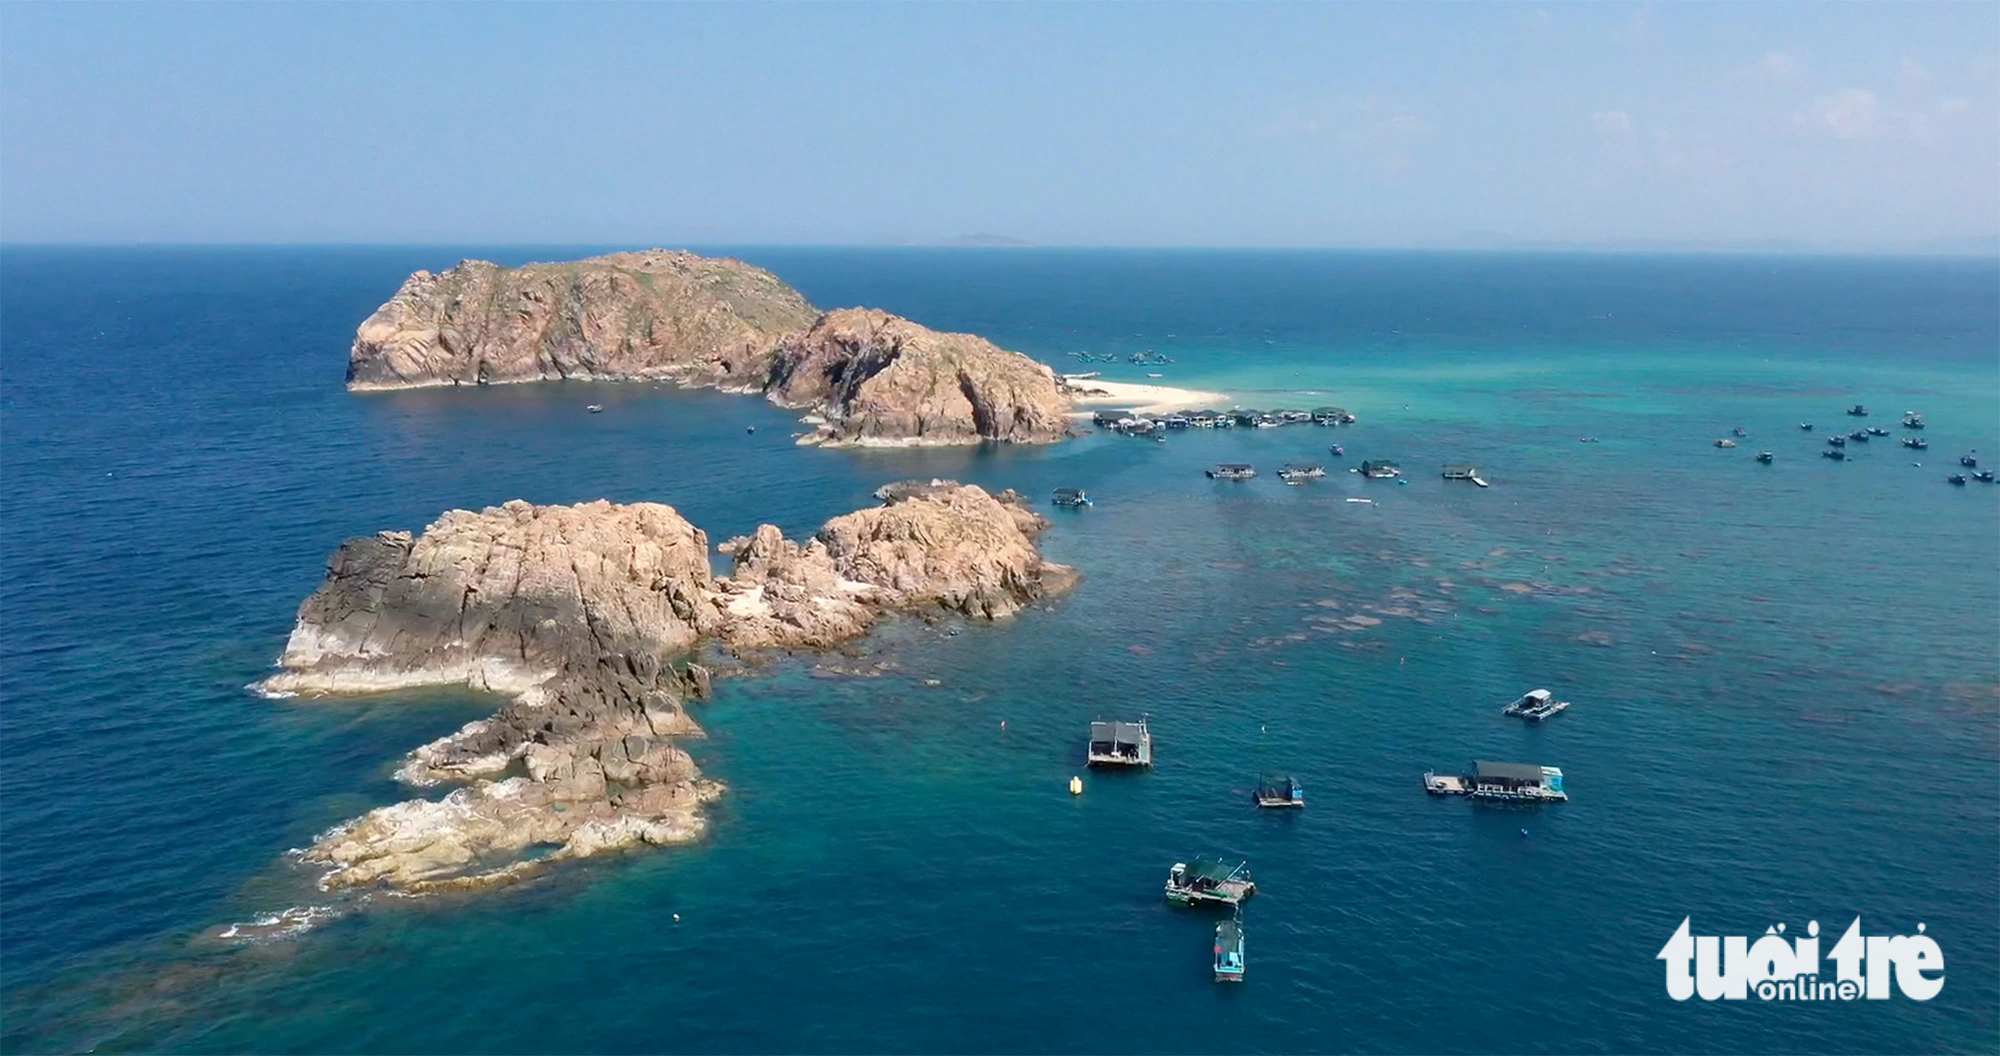 Visitors are recommended to go diving to explore colorful coral reefs at Nhon Hai Beach, located in Quy Nhon City, Binh Dinh Province, south-central Vietnam. Photo: Huong Mai / Tuoi Tre